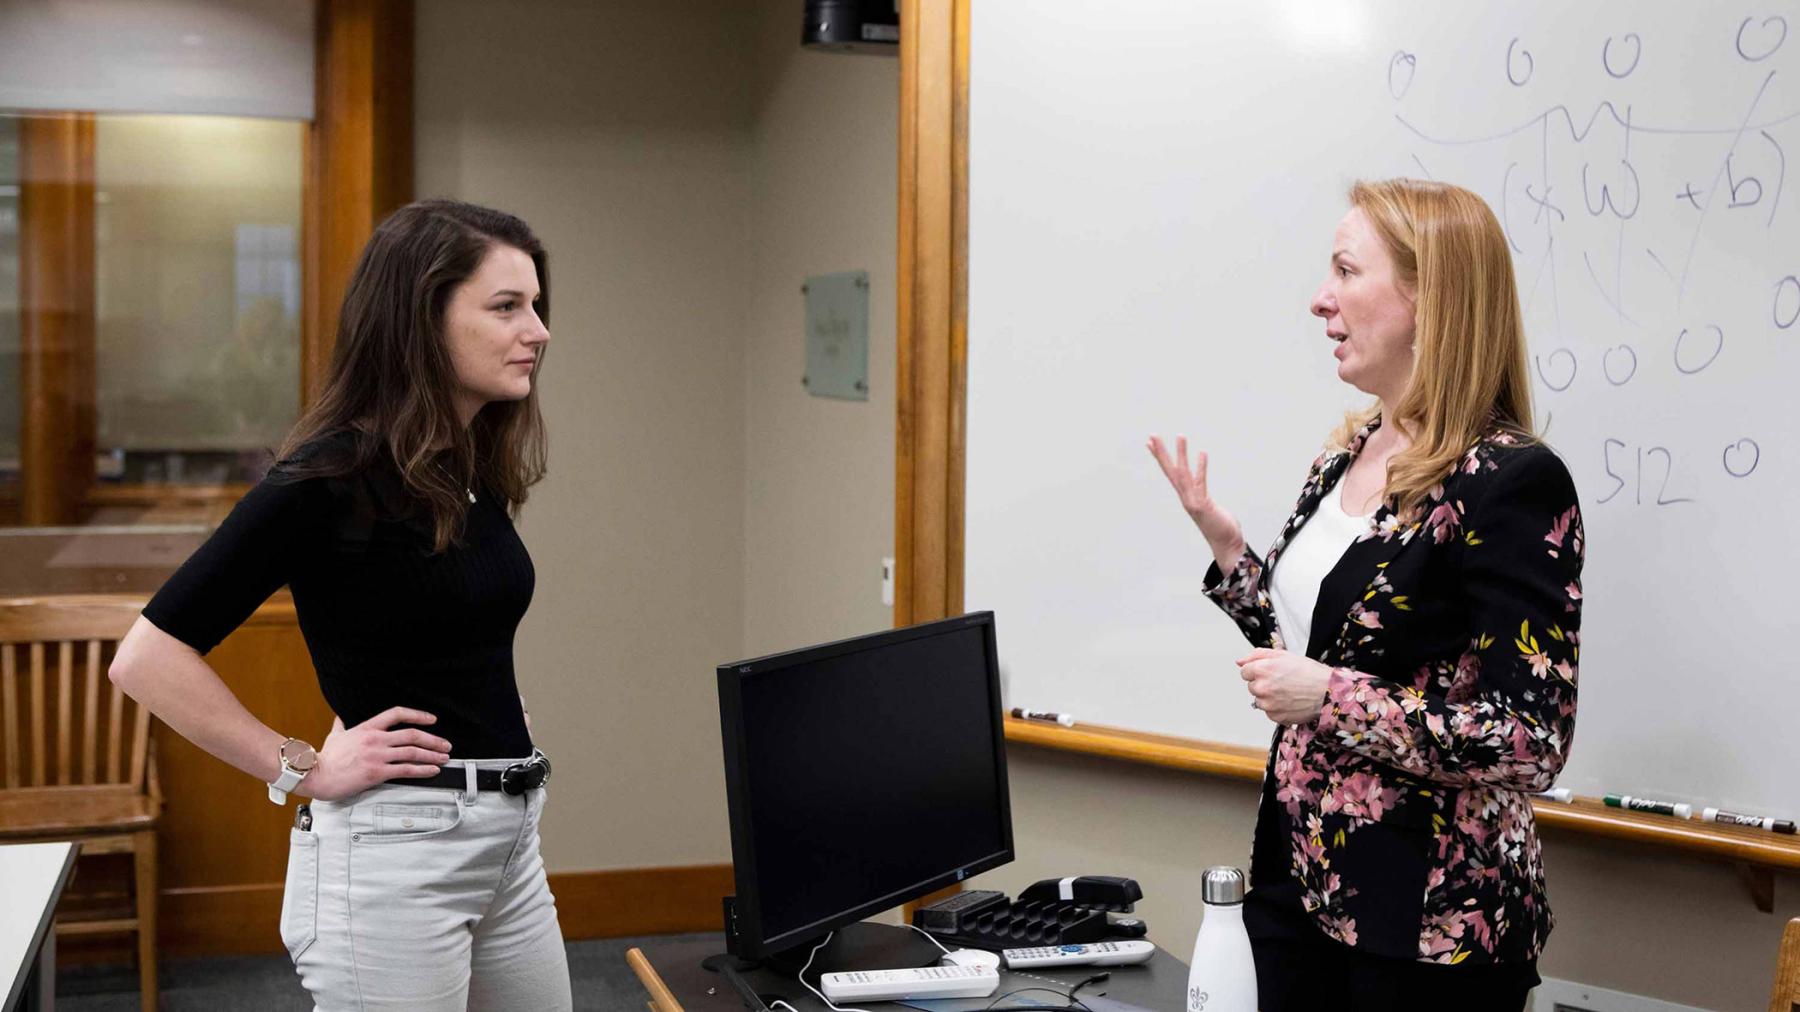 Rachel Metzgar (left), a graduate student in psychology, discusses the applications of machine learning to her own research with Sarah-Jane Leslie (right), the Class of 1943 Professor of Philosophy,